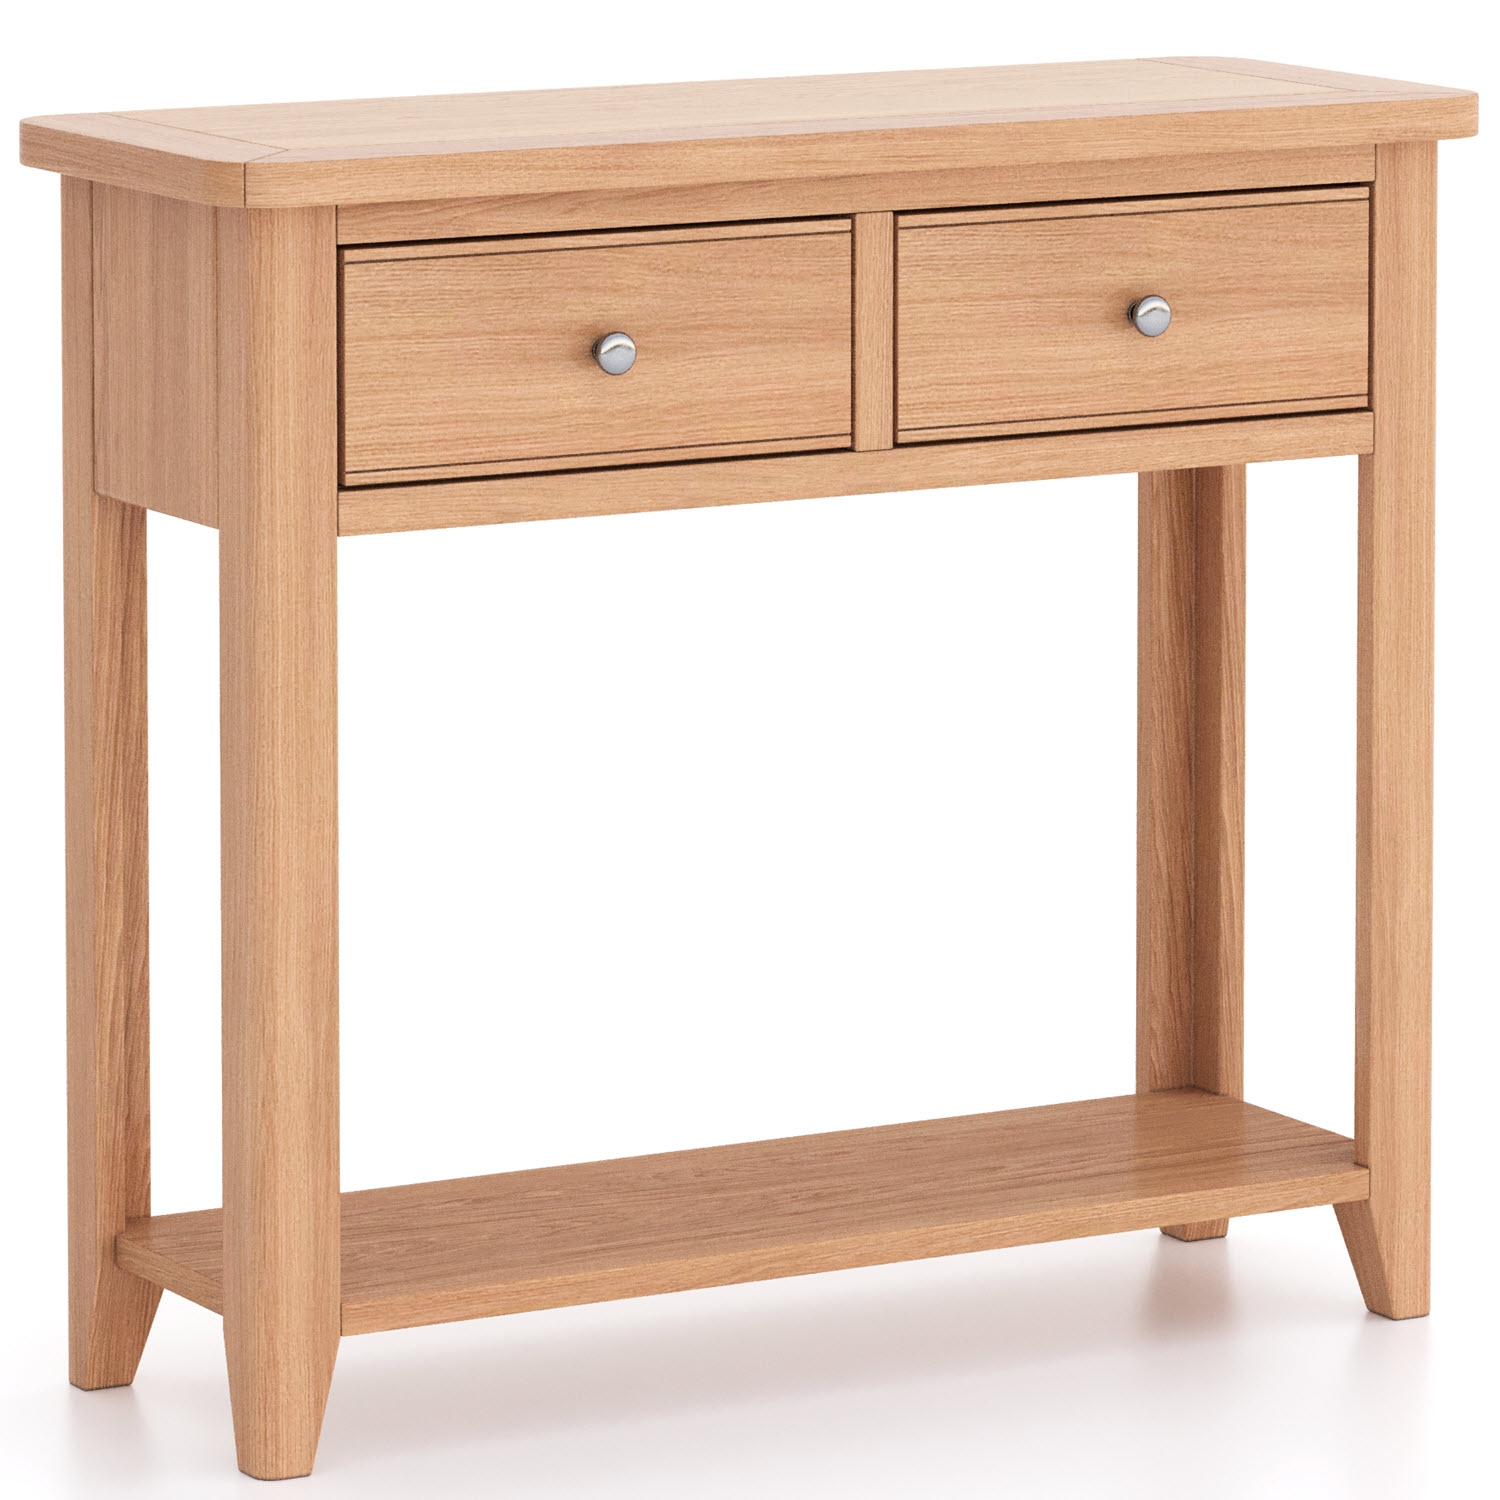 Arden Narrow Console Table 2 Drawers Hallway